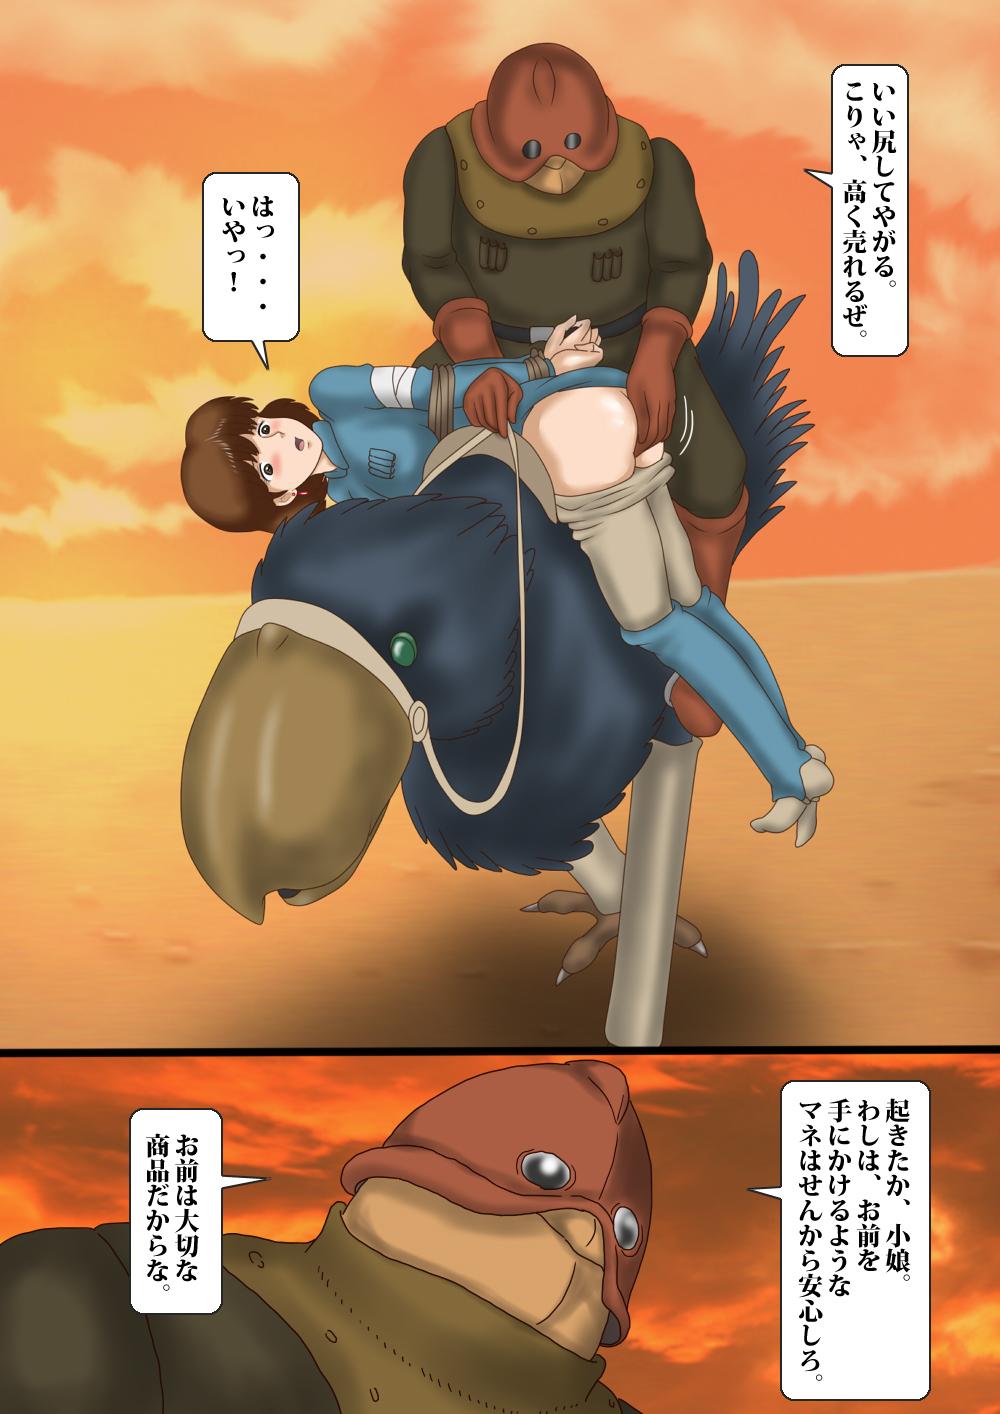 Anal Sex Kaze no Tani no Goumon Aido - Nausicaa of the valley of the wind Kiss - Picture 3